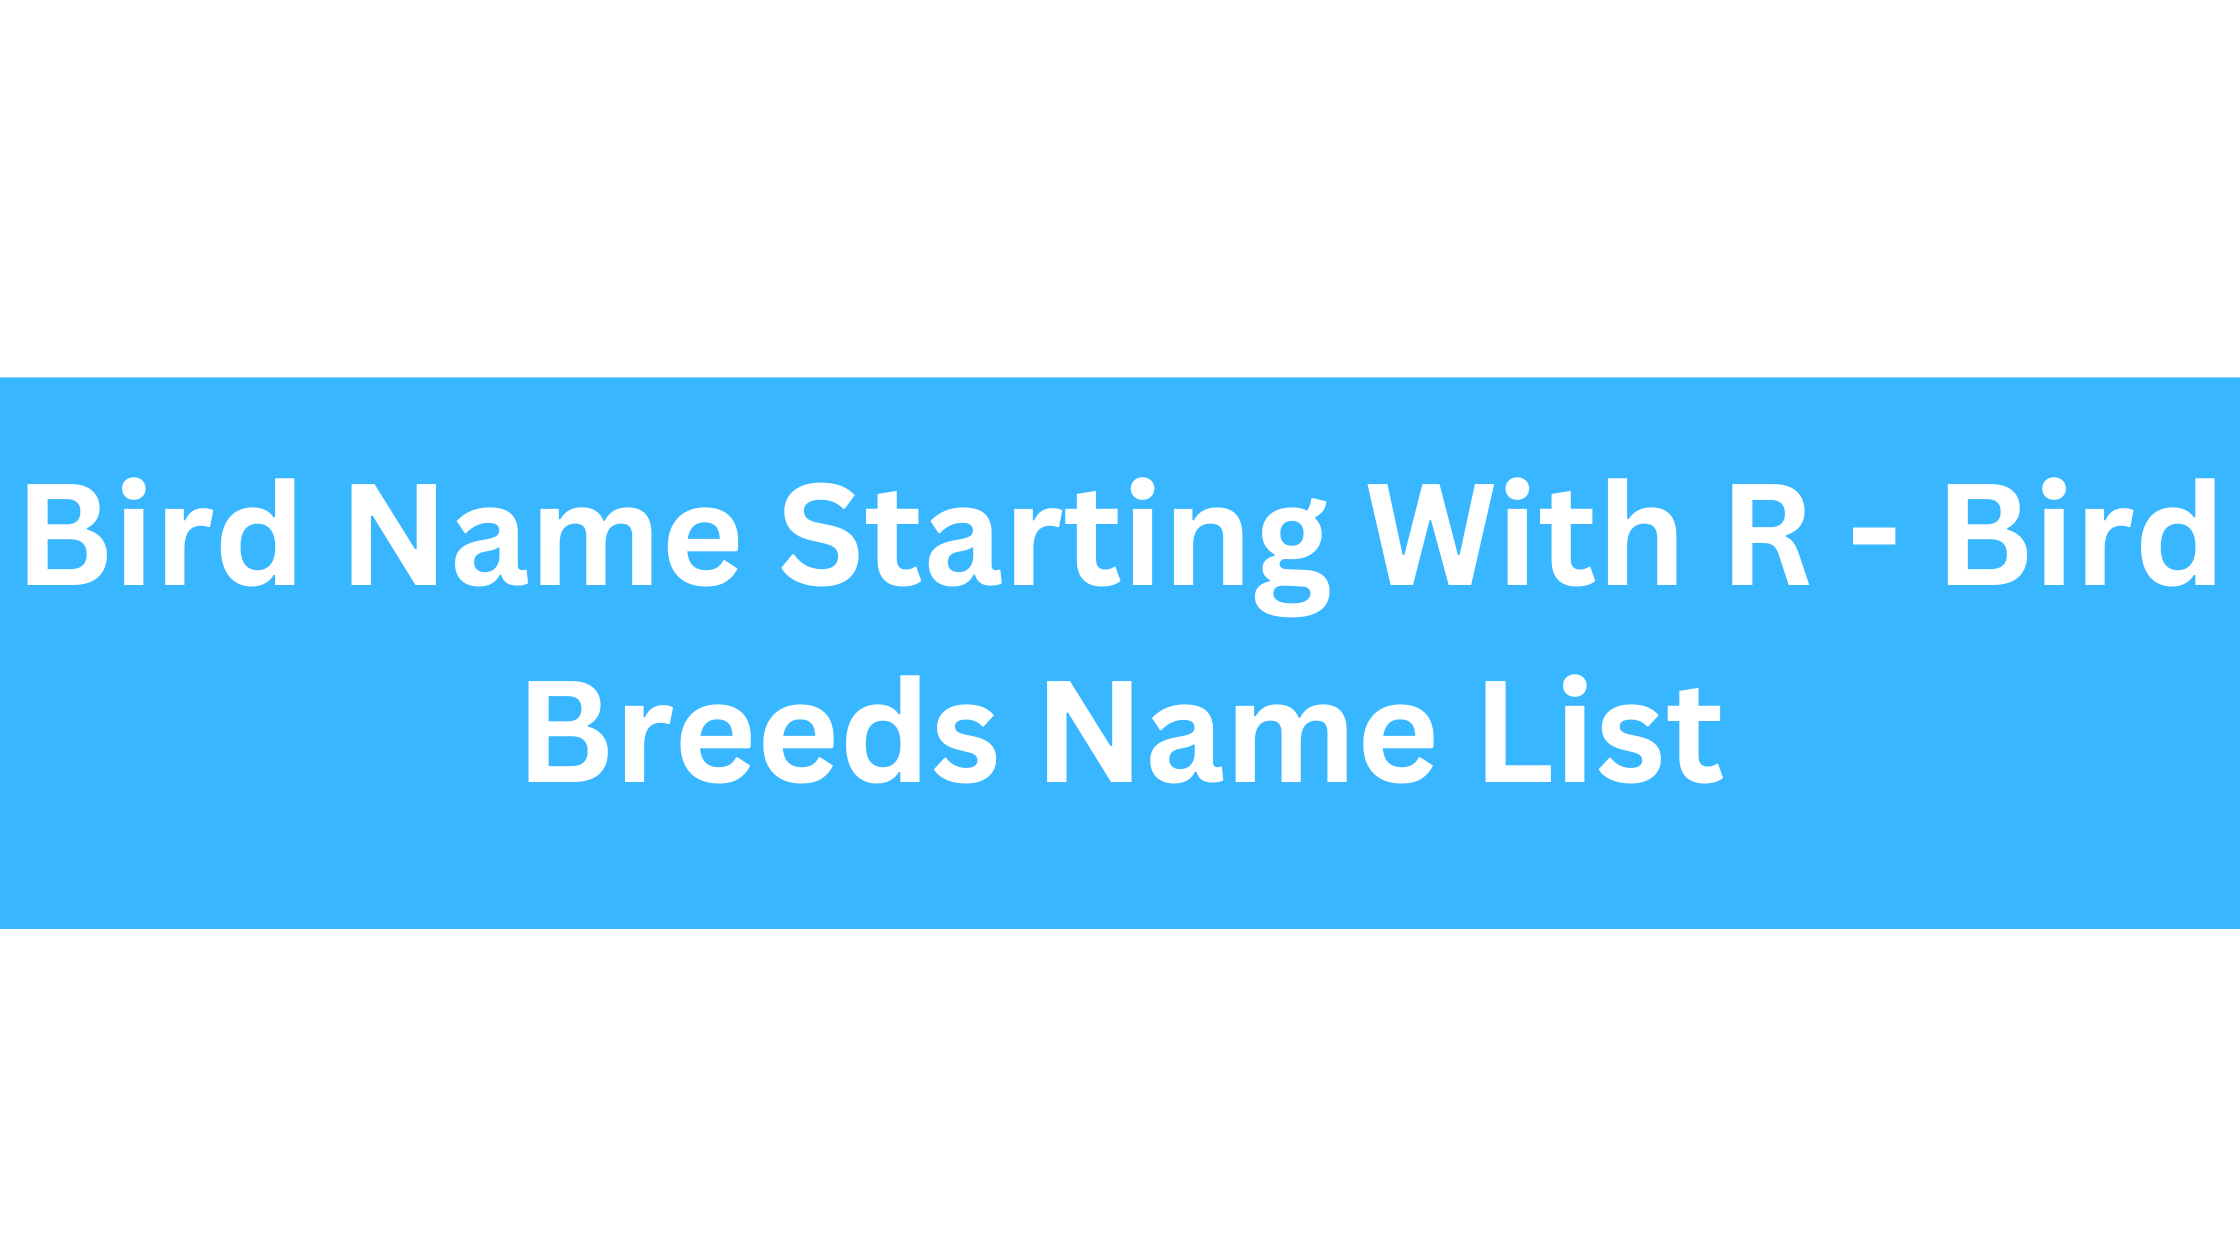 Bird Name Starting With R